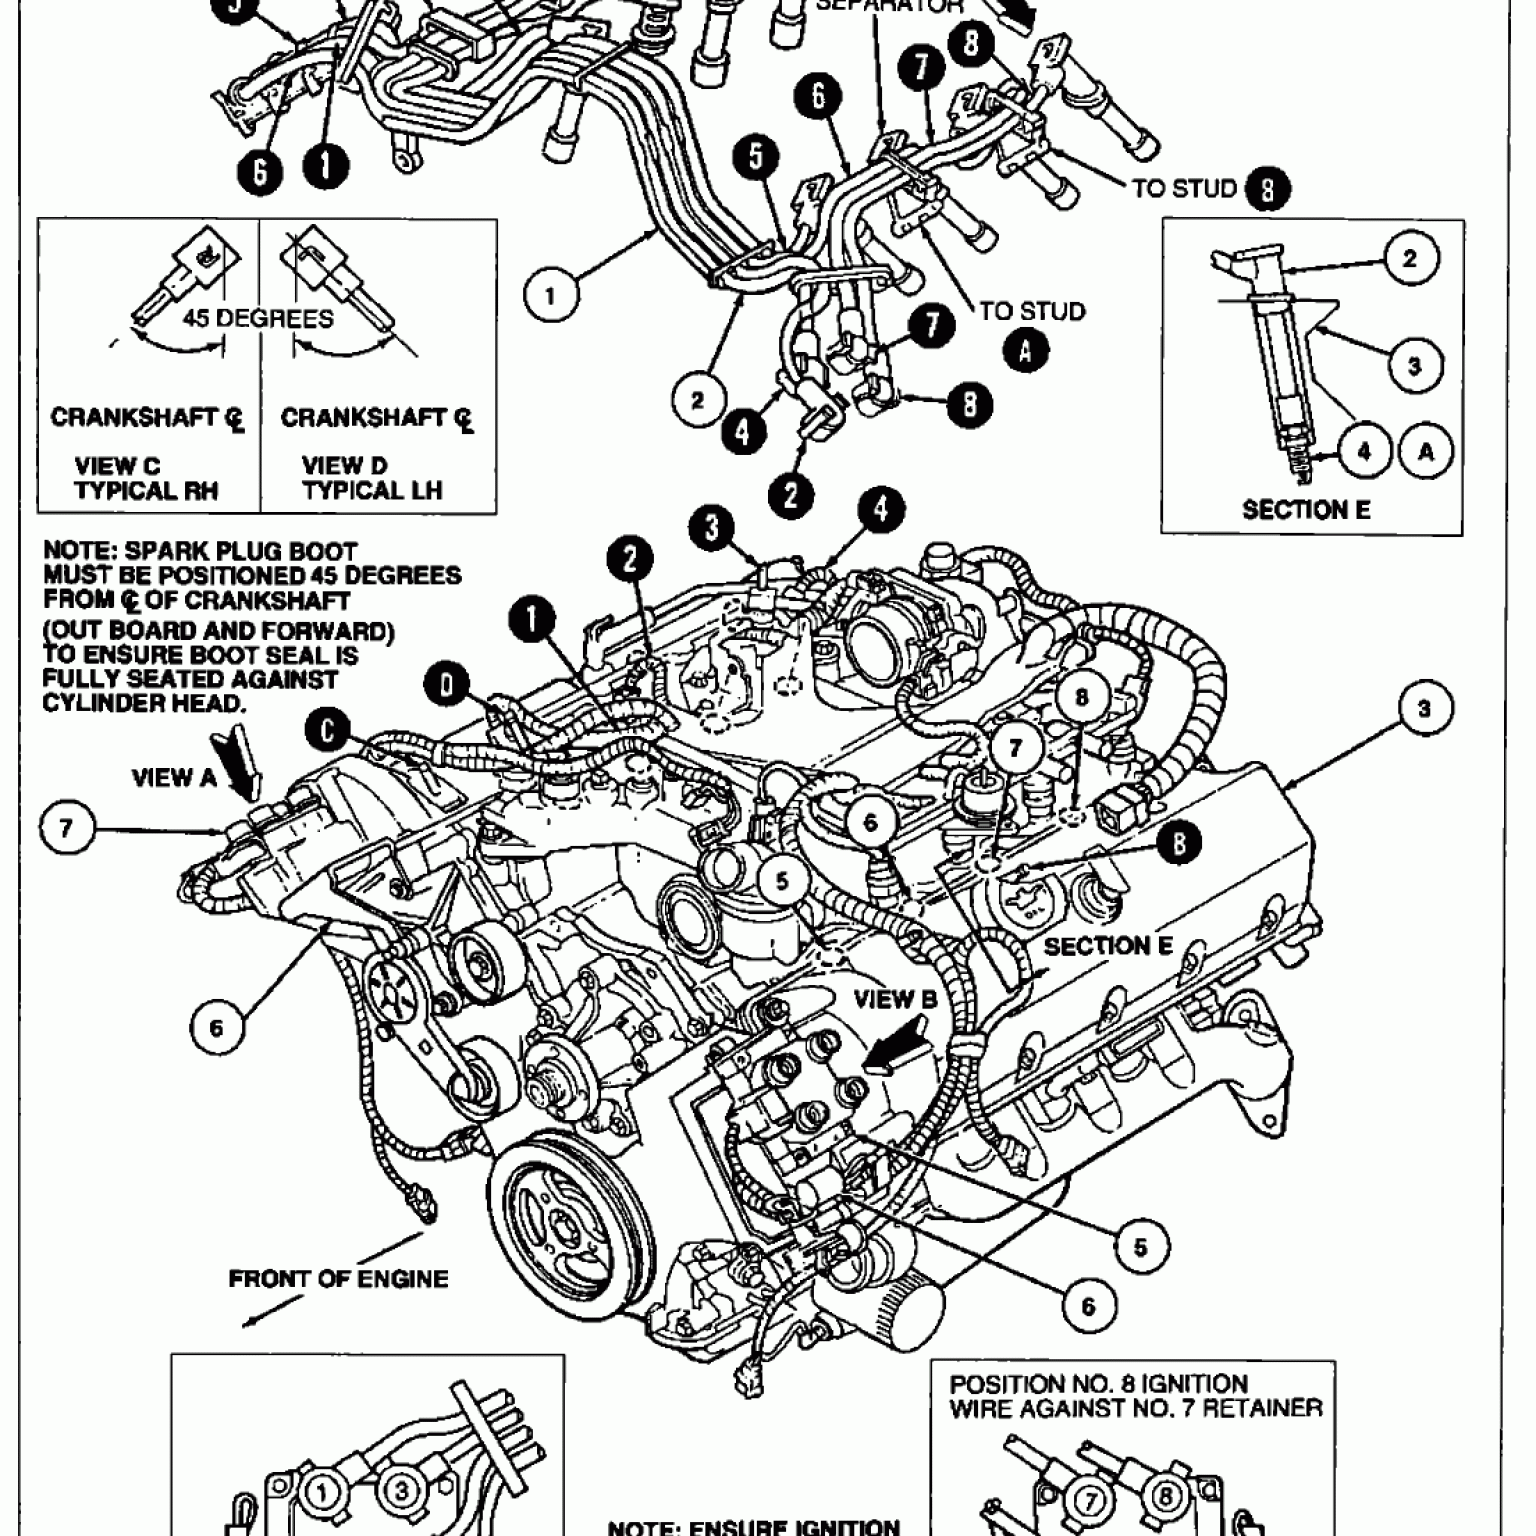 Diagram] Download Firing Order Chevy 350 Distributor Wiring | Wiring and Printable